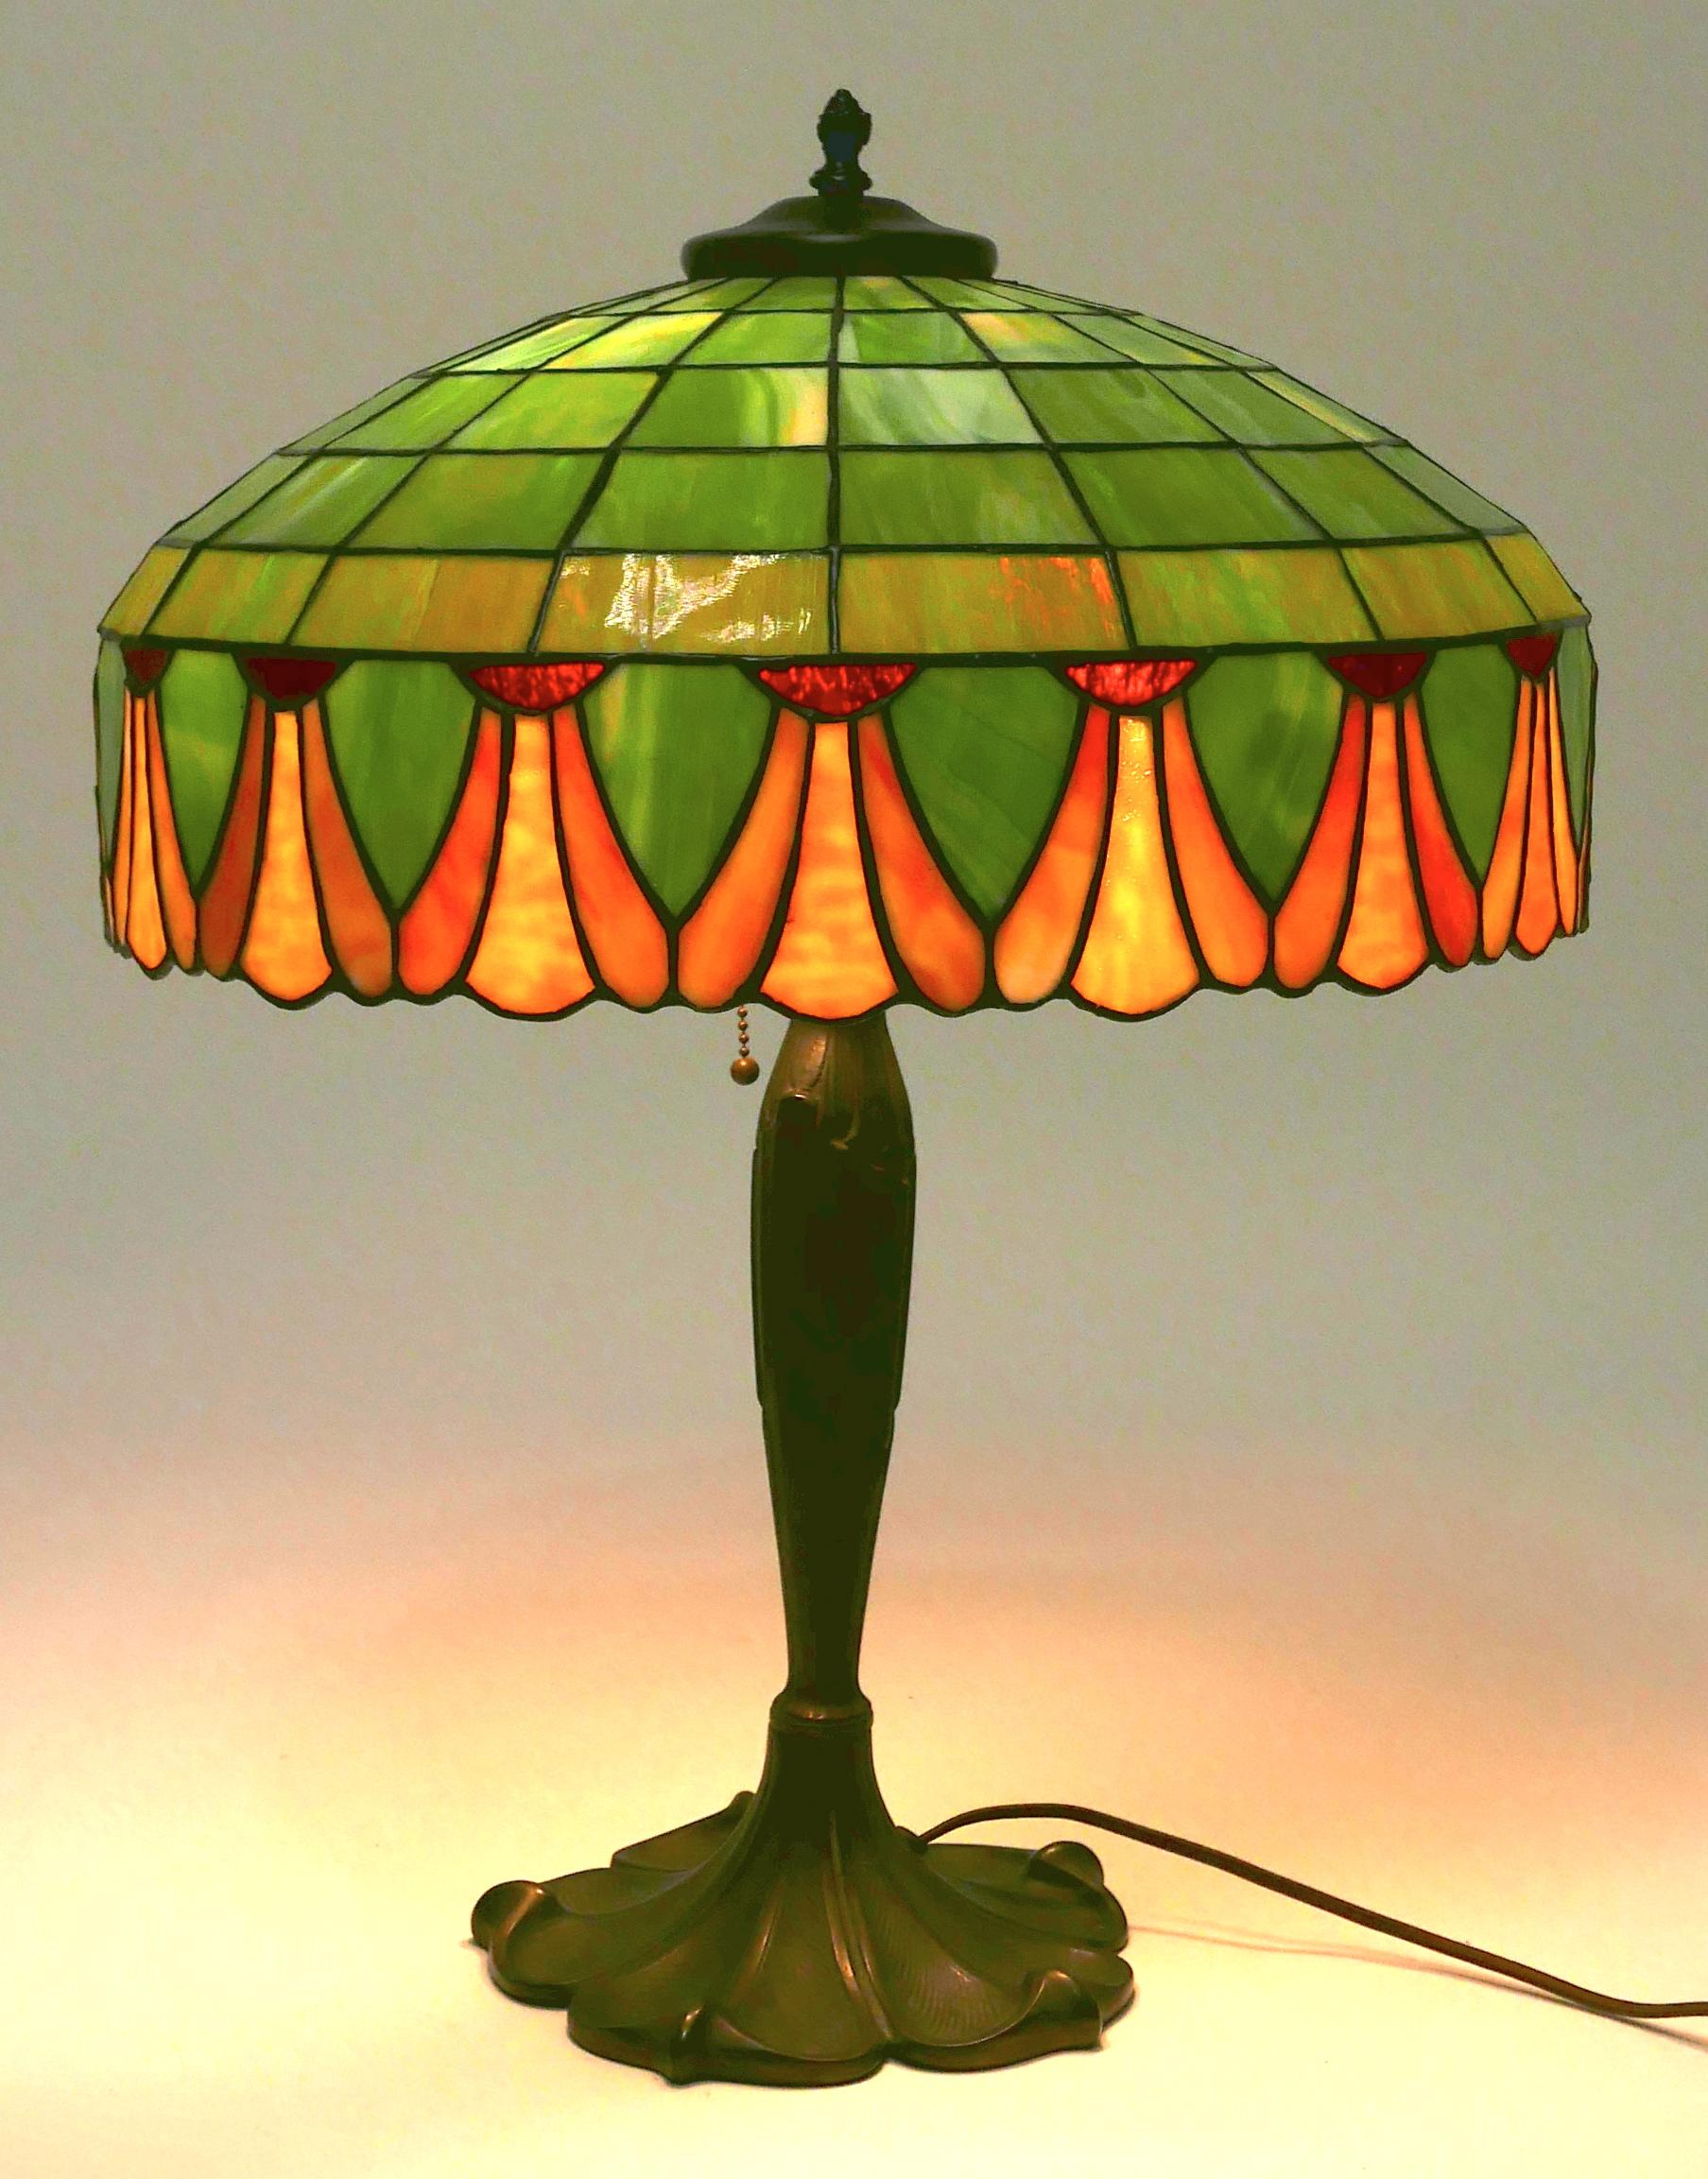 A fine Art Nouveau period leaded glass shade and a graceful brass plated cast iron base table lamp by the Indiana firm: Lamb Bros. & Greene. In the manner of Tiffany Studios.
American, circa 1910- 1920.